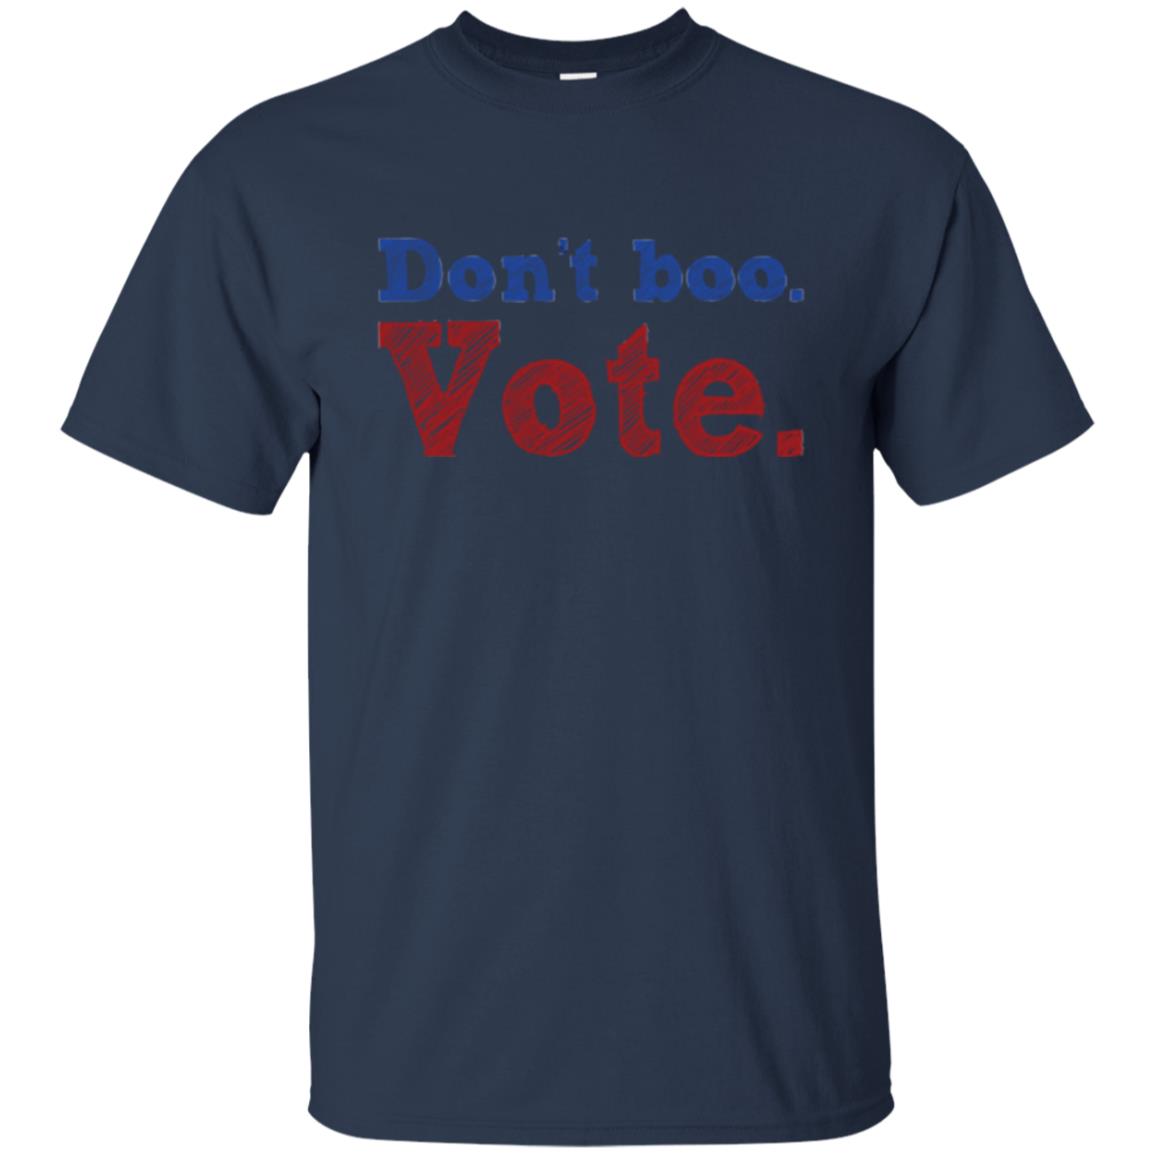 Don't Boo Vote Shirt - 10% Off - FavorMerch